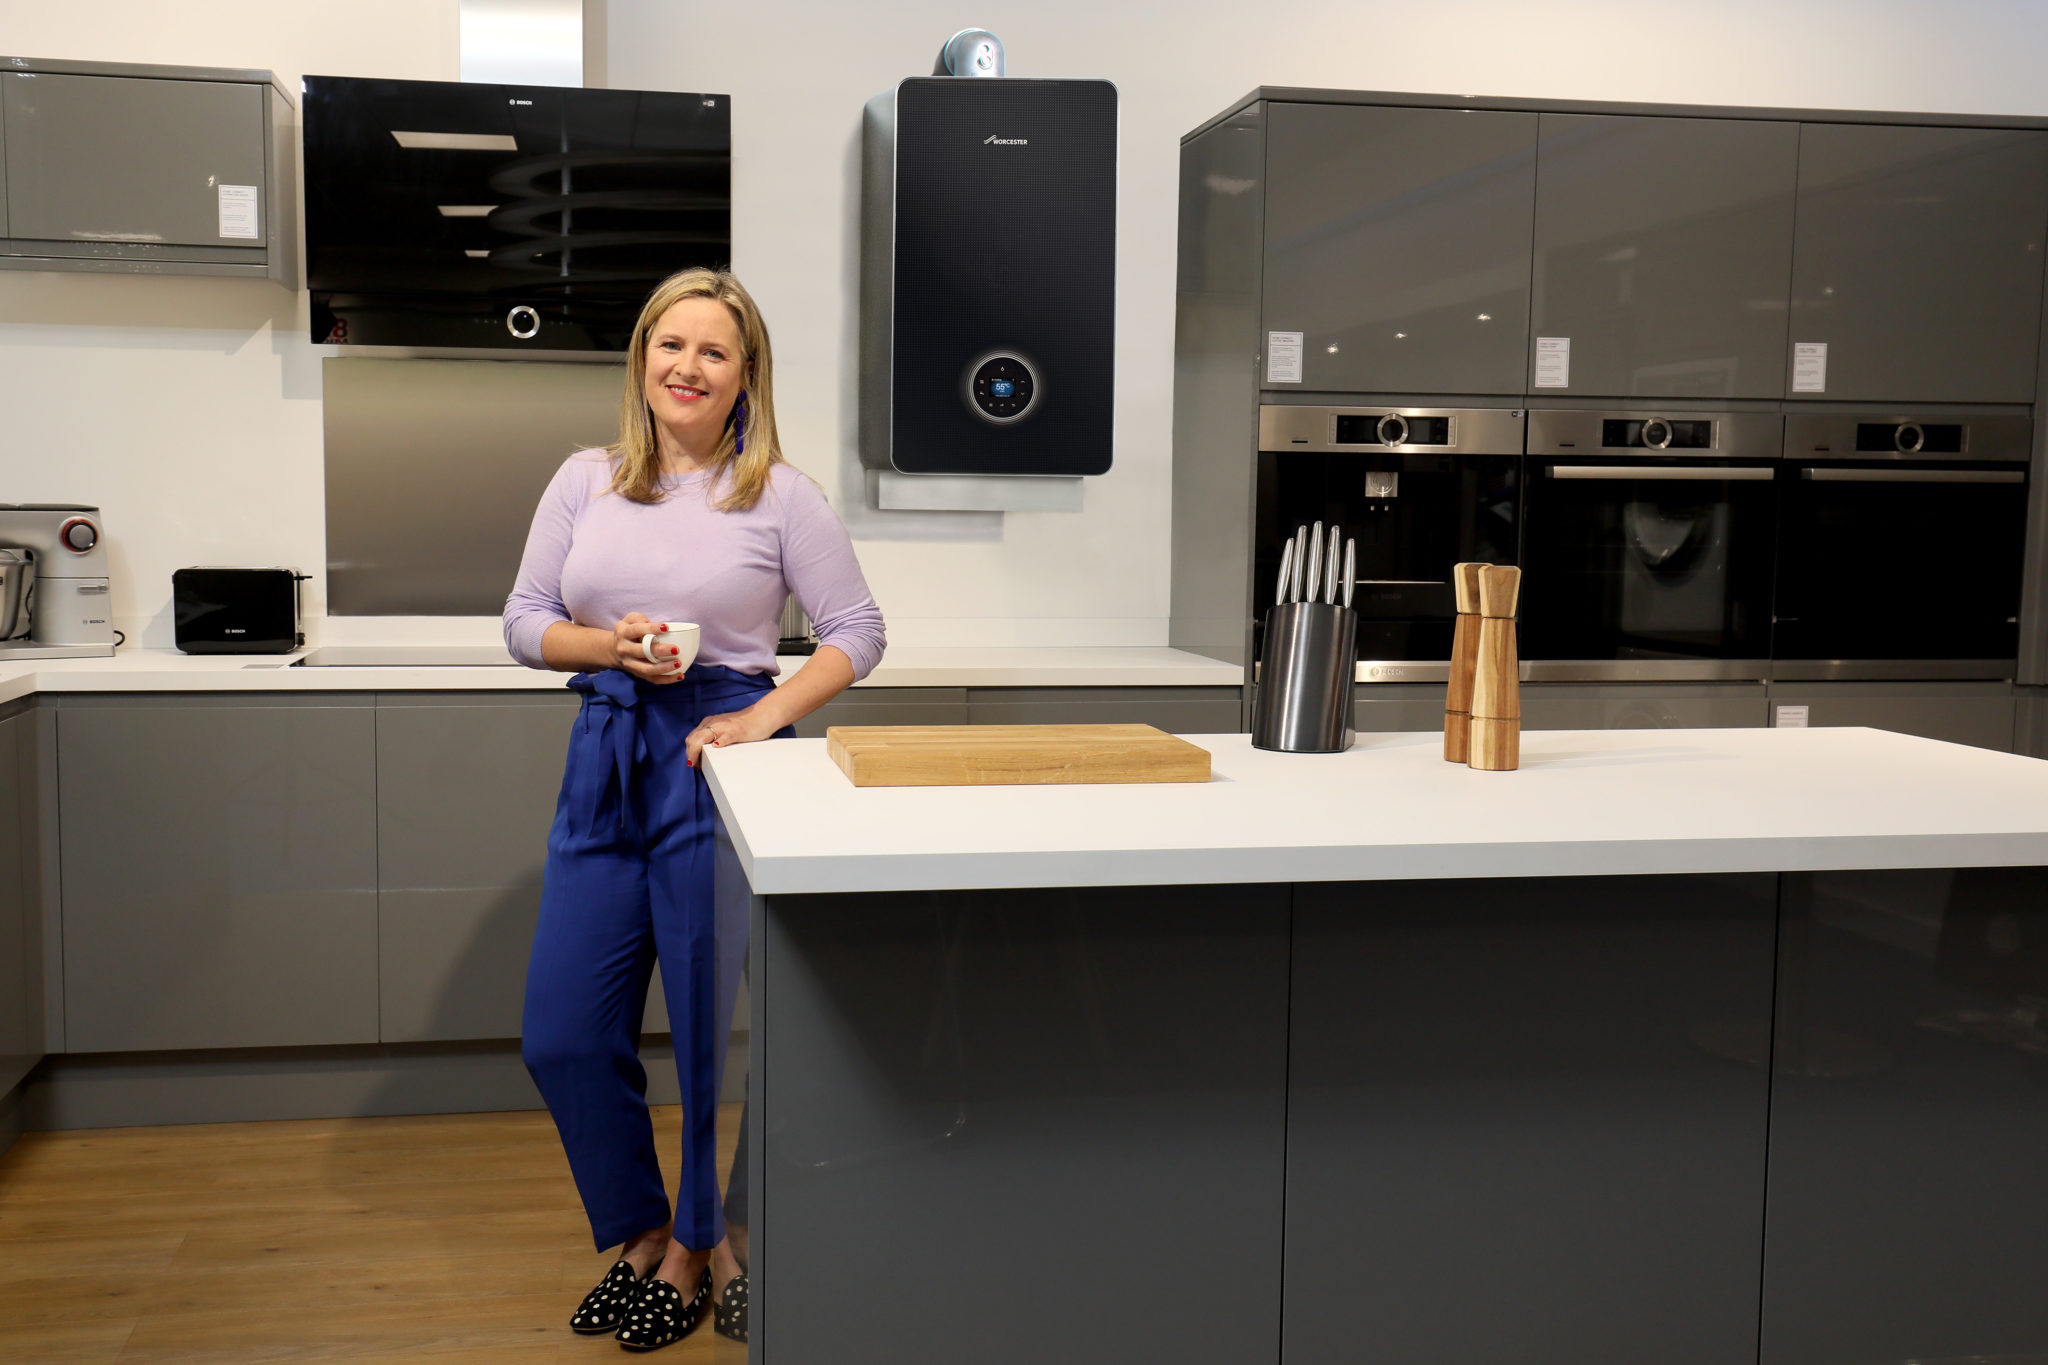 BOILERS ARE THE NEW BLACK SAYS SOPHIE ROBINSON AS WORCESTER BOSCH INTRODUCES FIRST ‘DESIGNER BOILER’ @HeatingYourHome